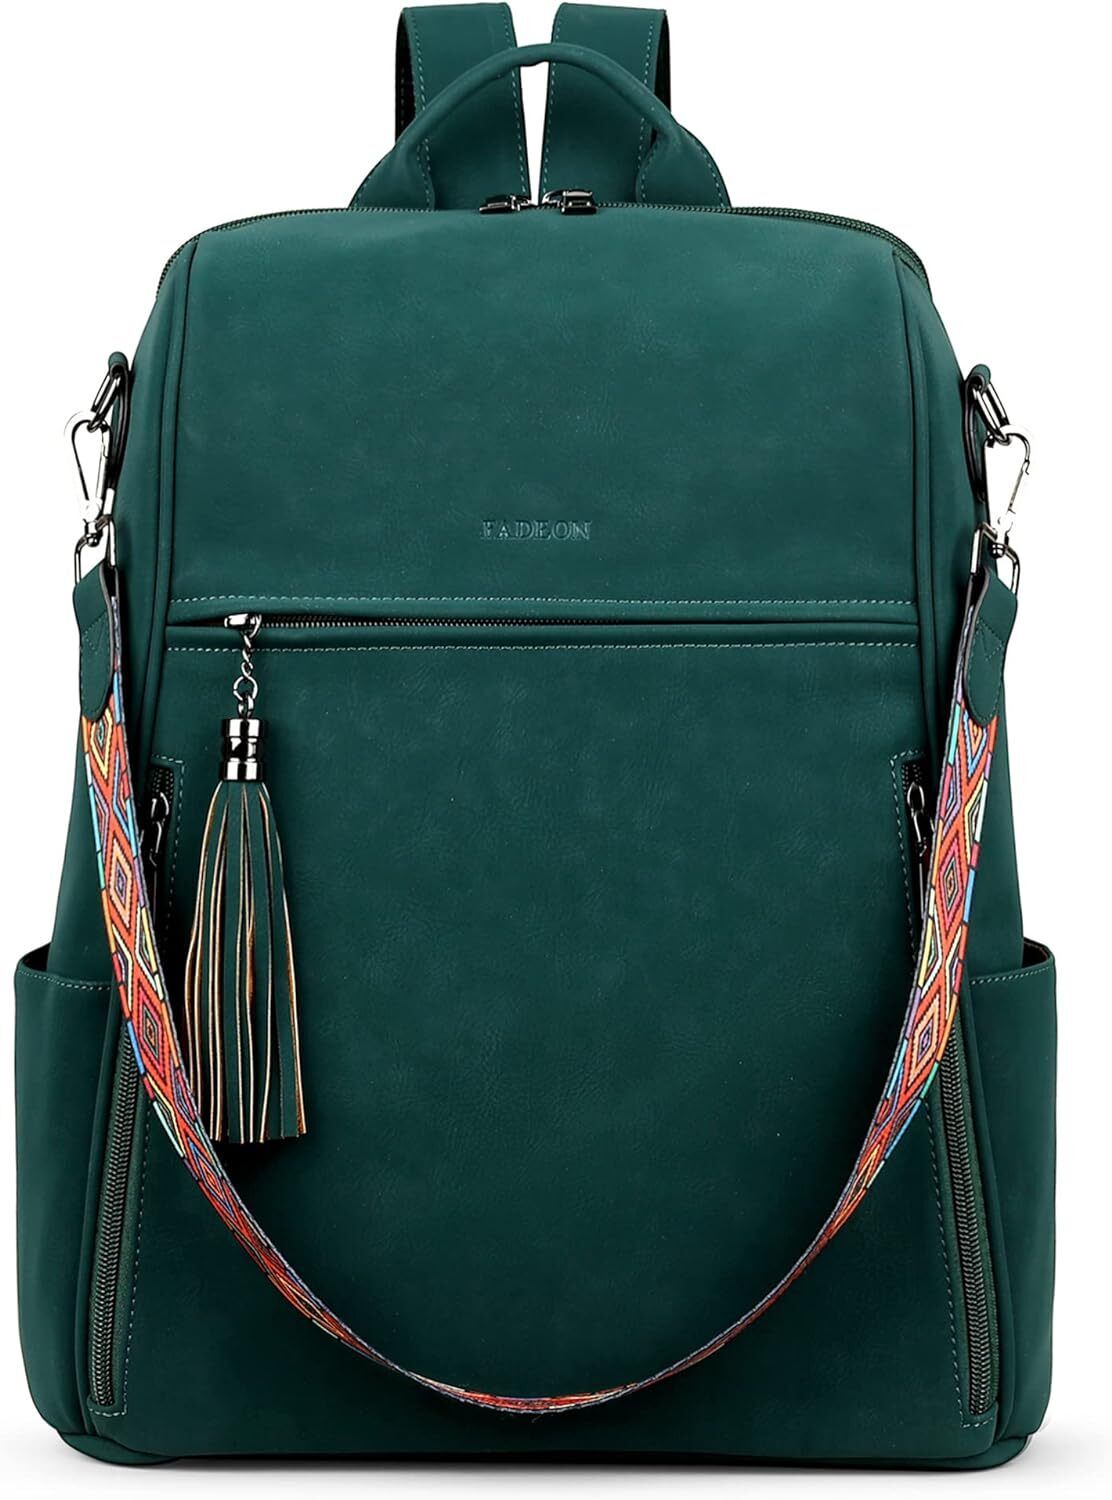 FADEON Laptop Backpack Purse Large (15.5-in Height), Dark Green Suede Style 